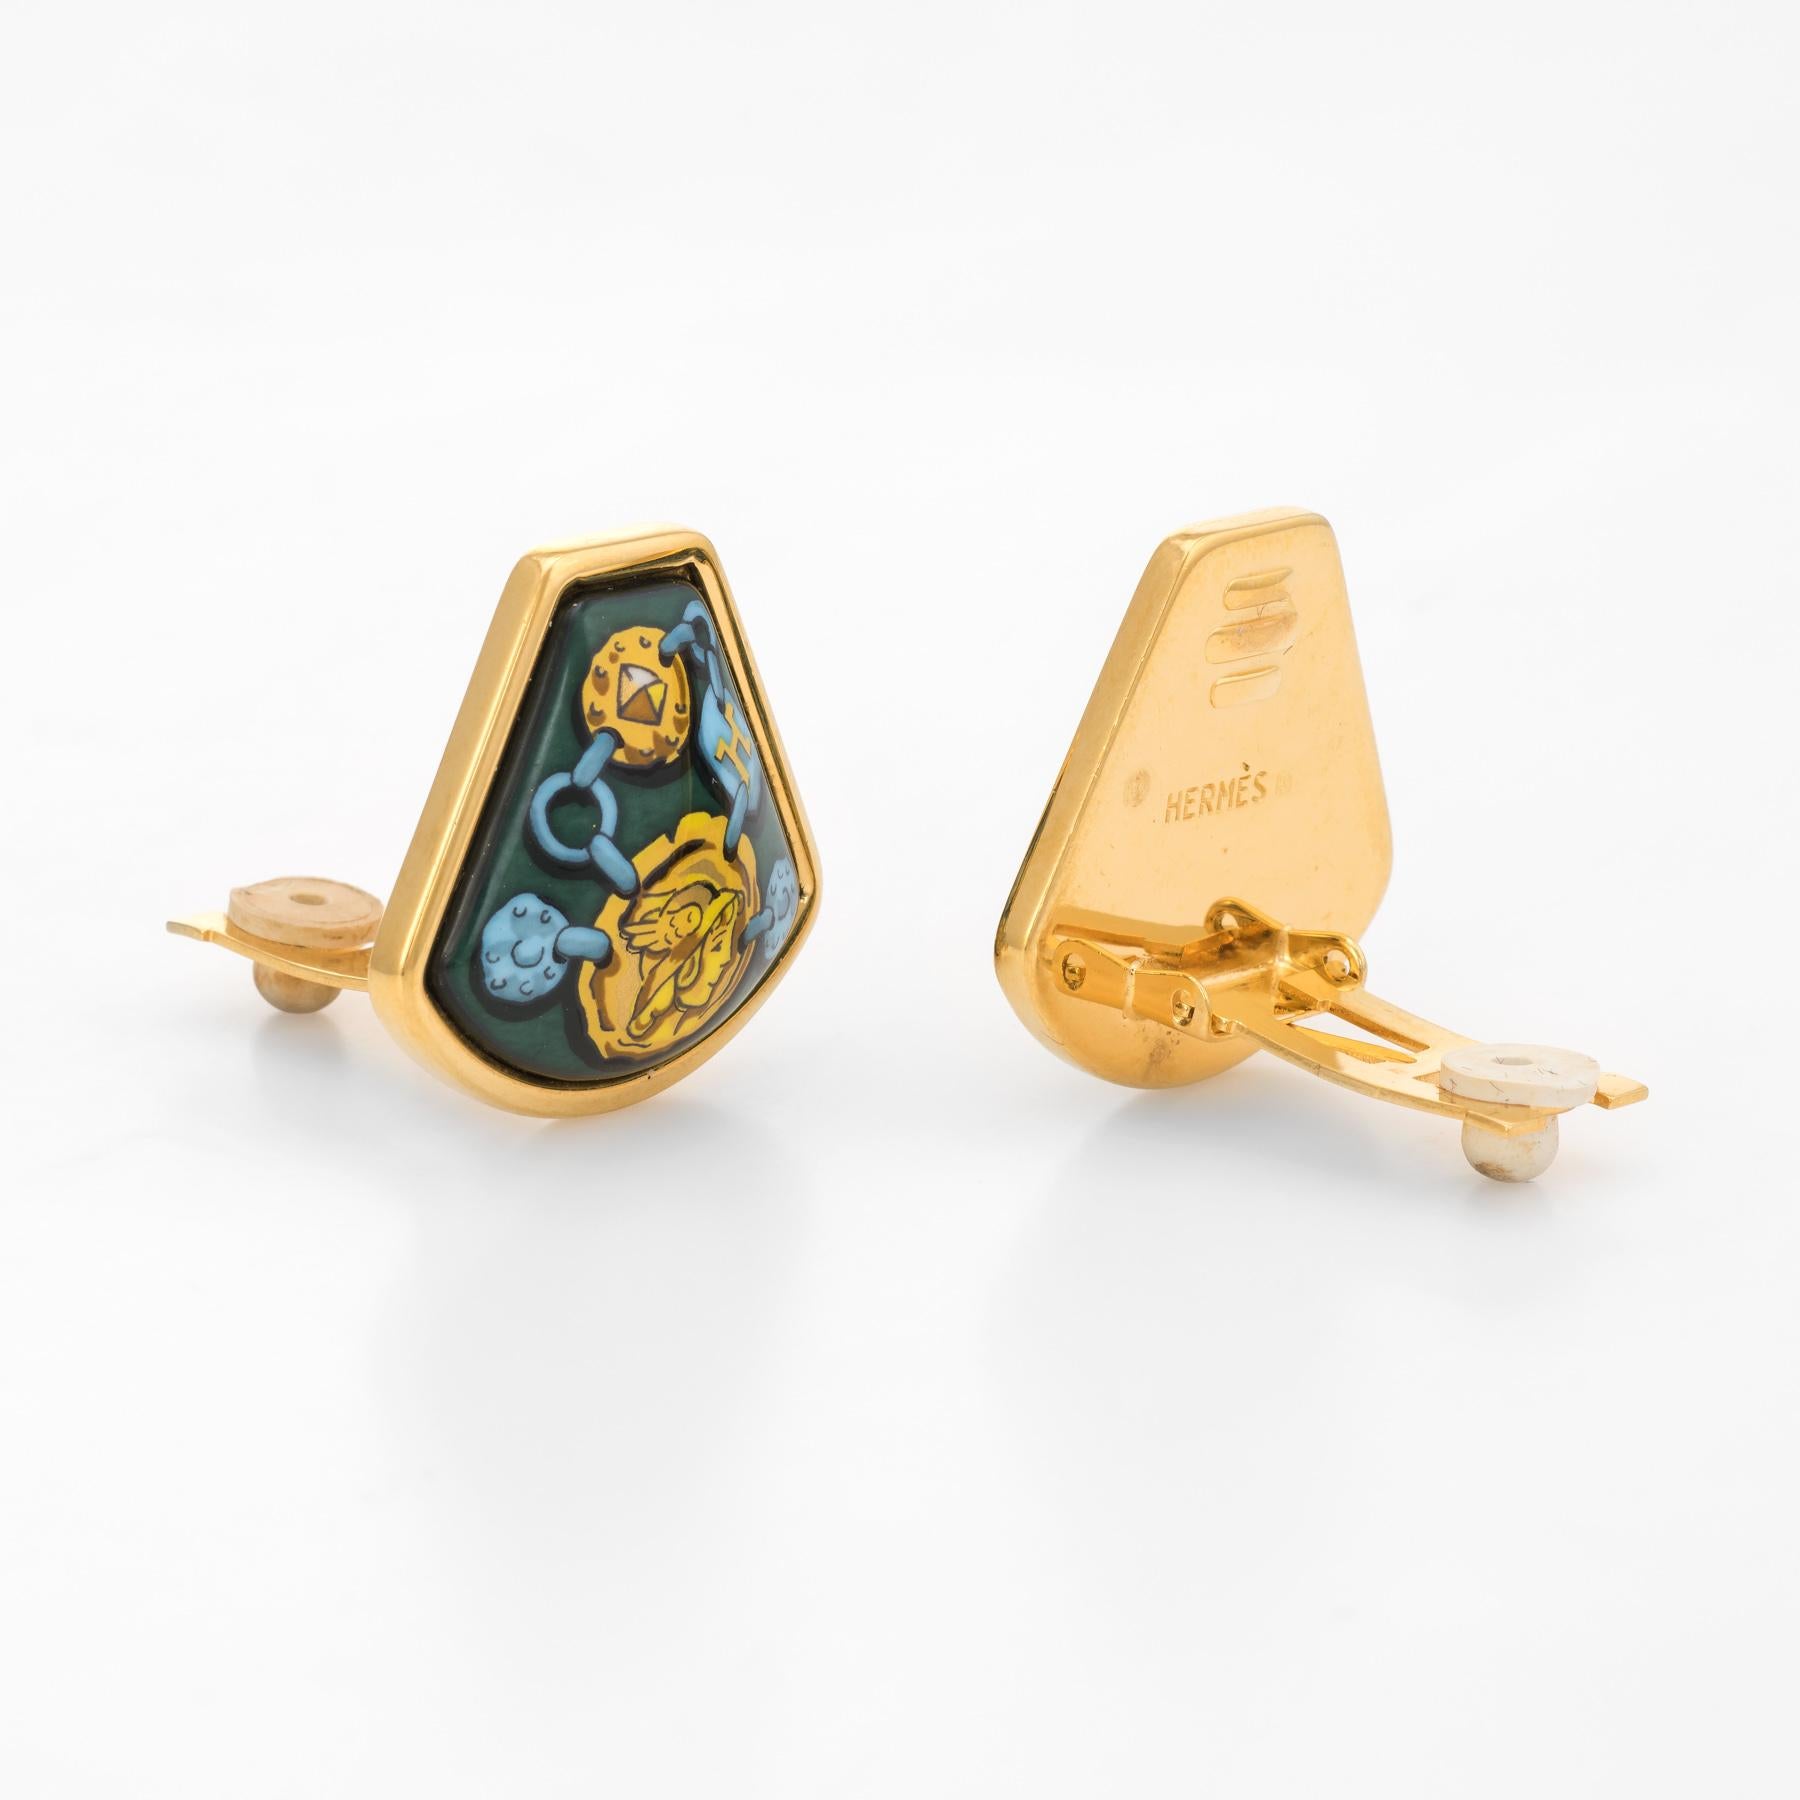 Finely detailed pair of Hermes enamel clip earrings, crafted in yellow gold tone. 

Vibrant green and gold colors, with the distinct Hermes linked design, terminating to a central motif of a female gladiator. The enamel is in excellent condition and